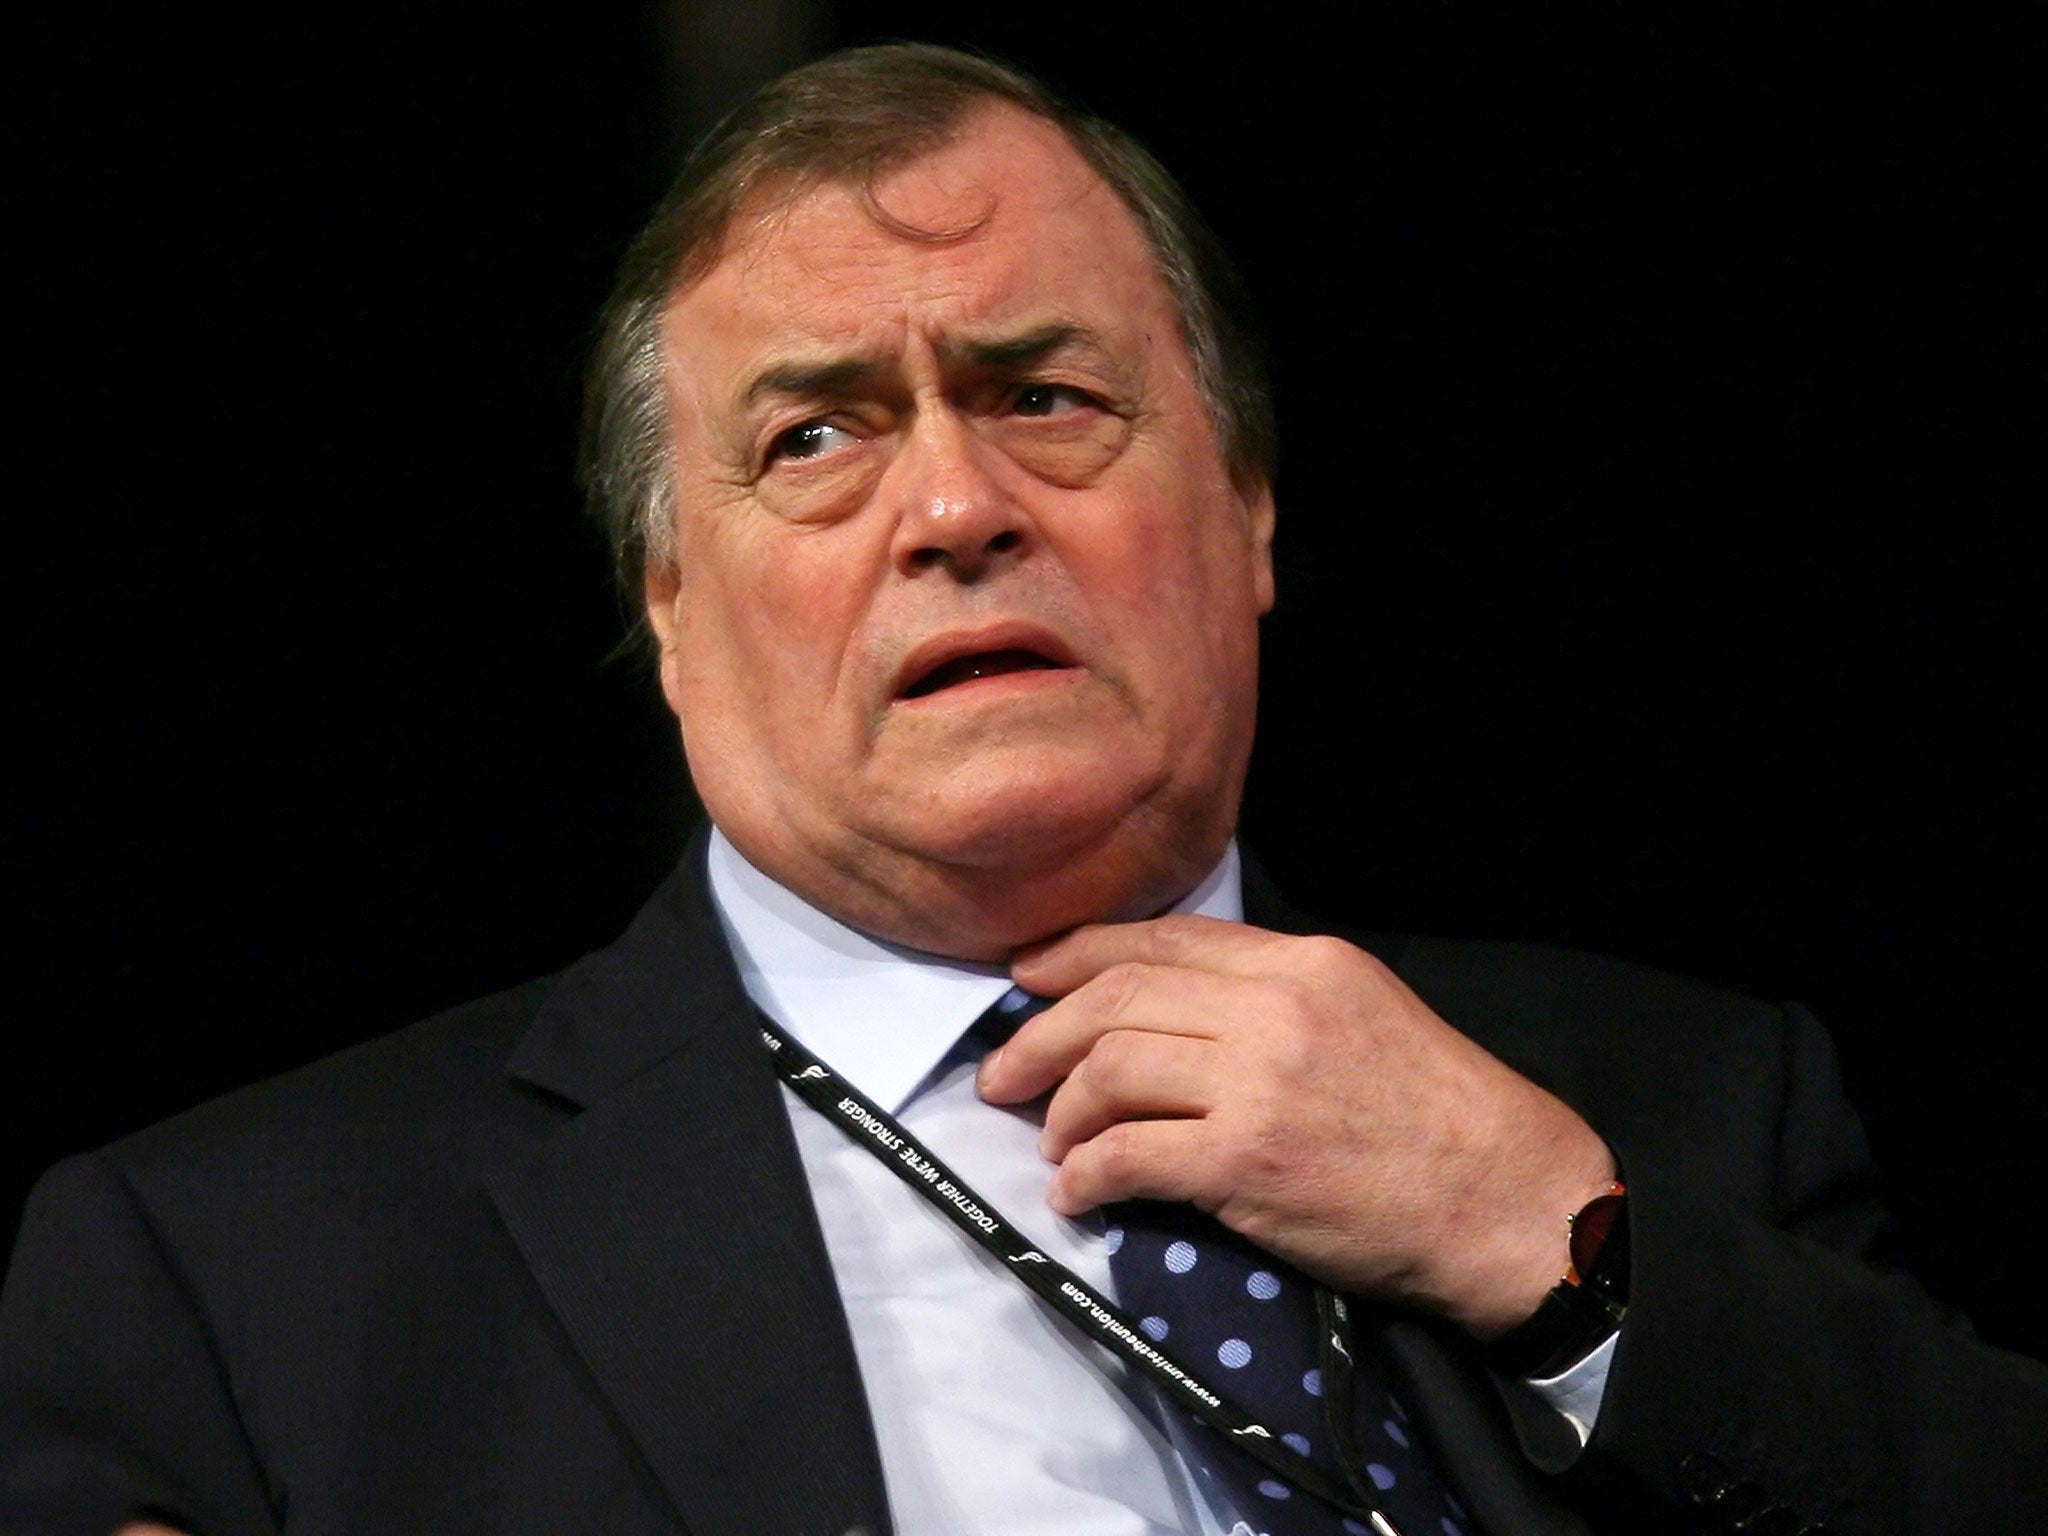 Lord Prescott, the former Deputy Prime Minister, fuelled the turmoil as he protested the party had 'massively failed' to get its case across and hold the Conservatives to account in recent weeks